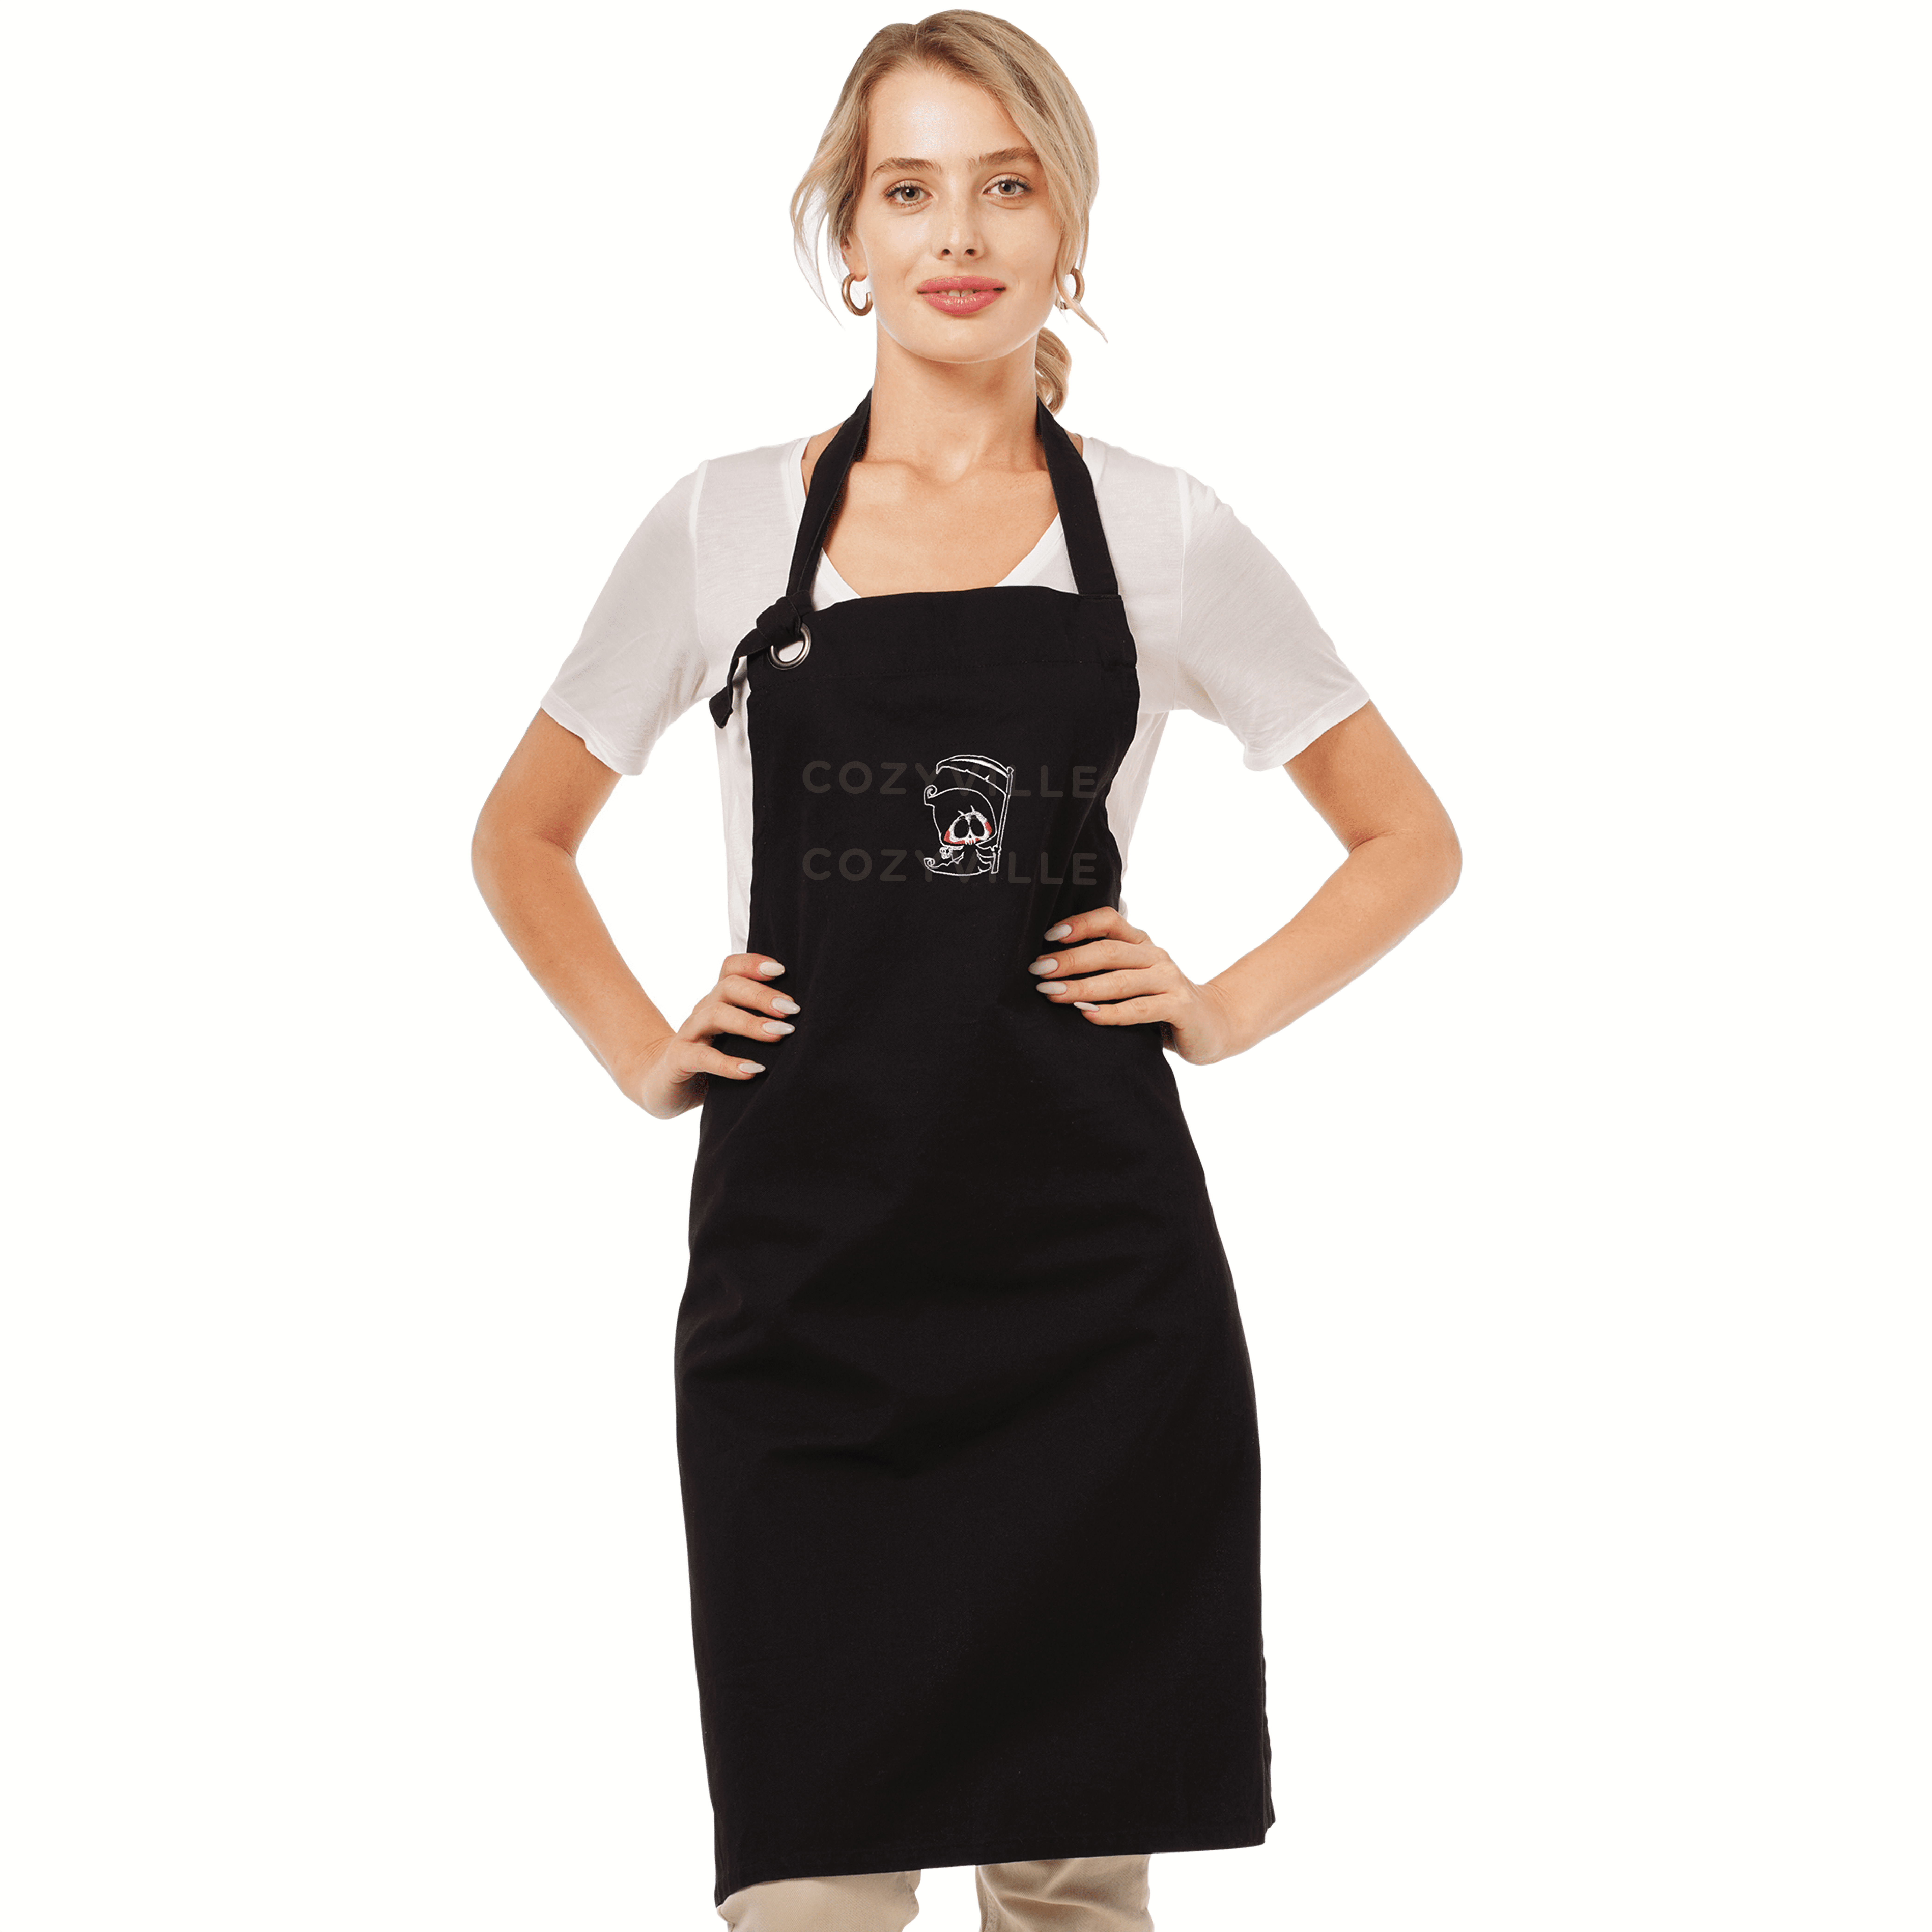 Apron for Women Men,American Football Team Design Chef Apron with Pockets for Kitchen Grilling 